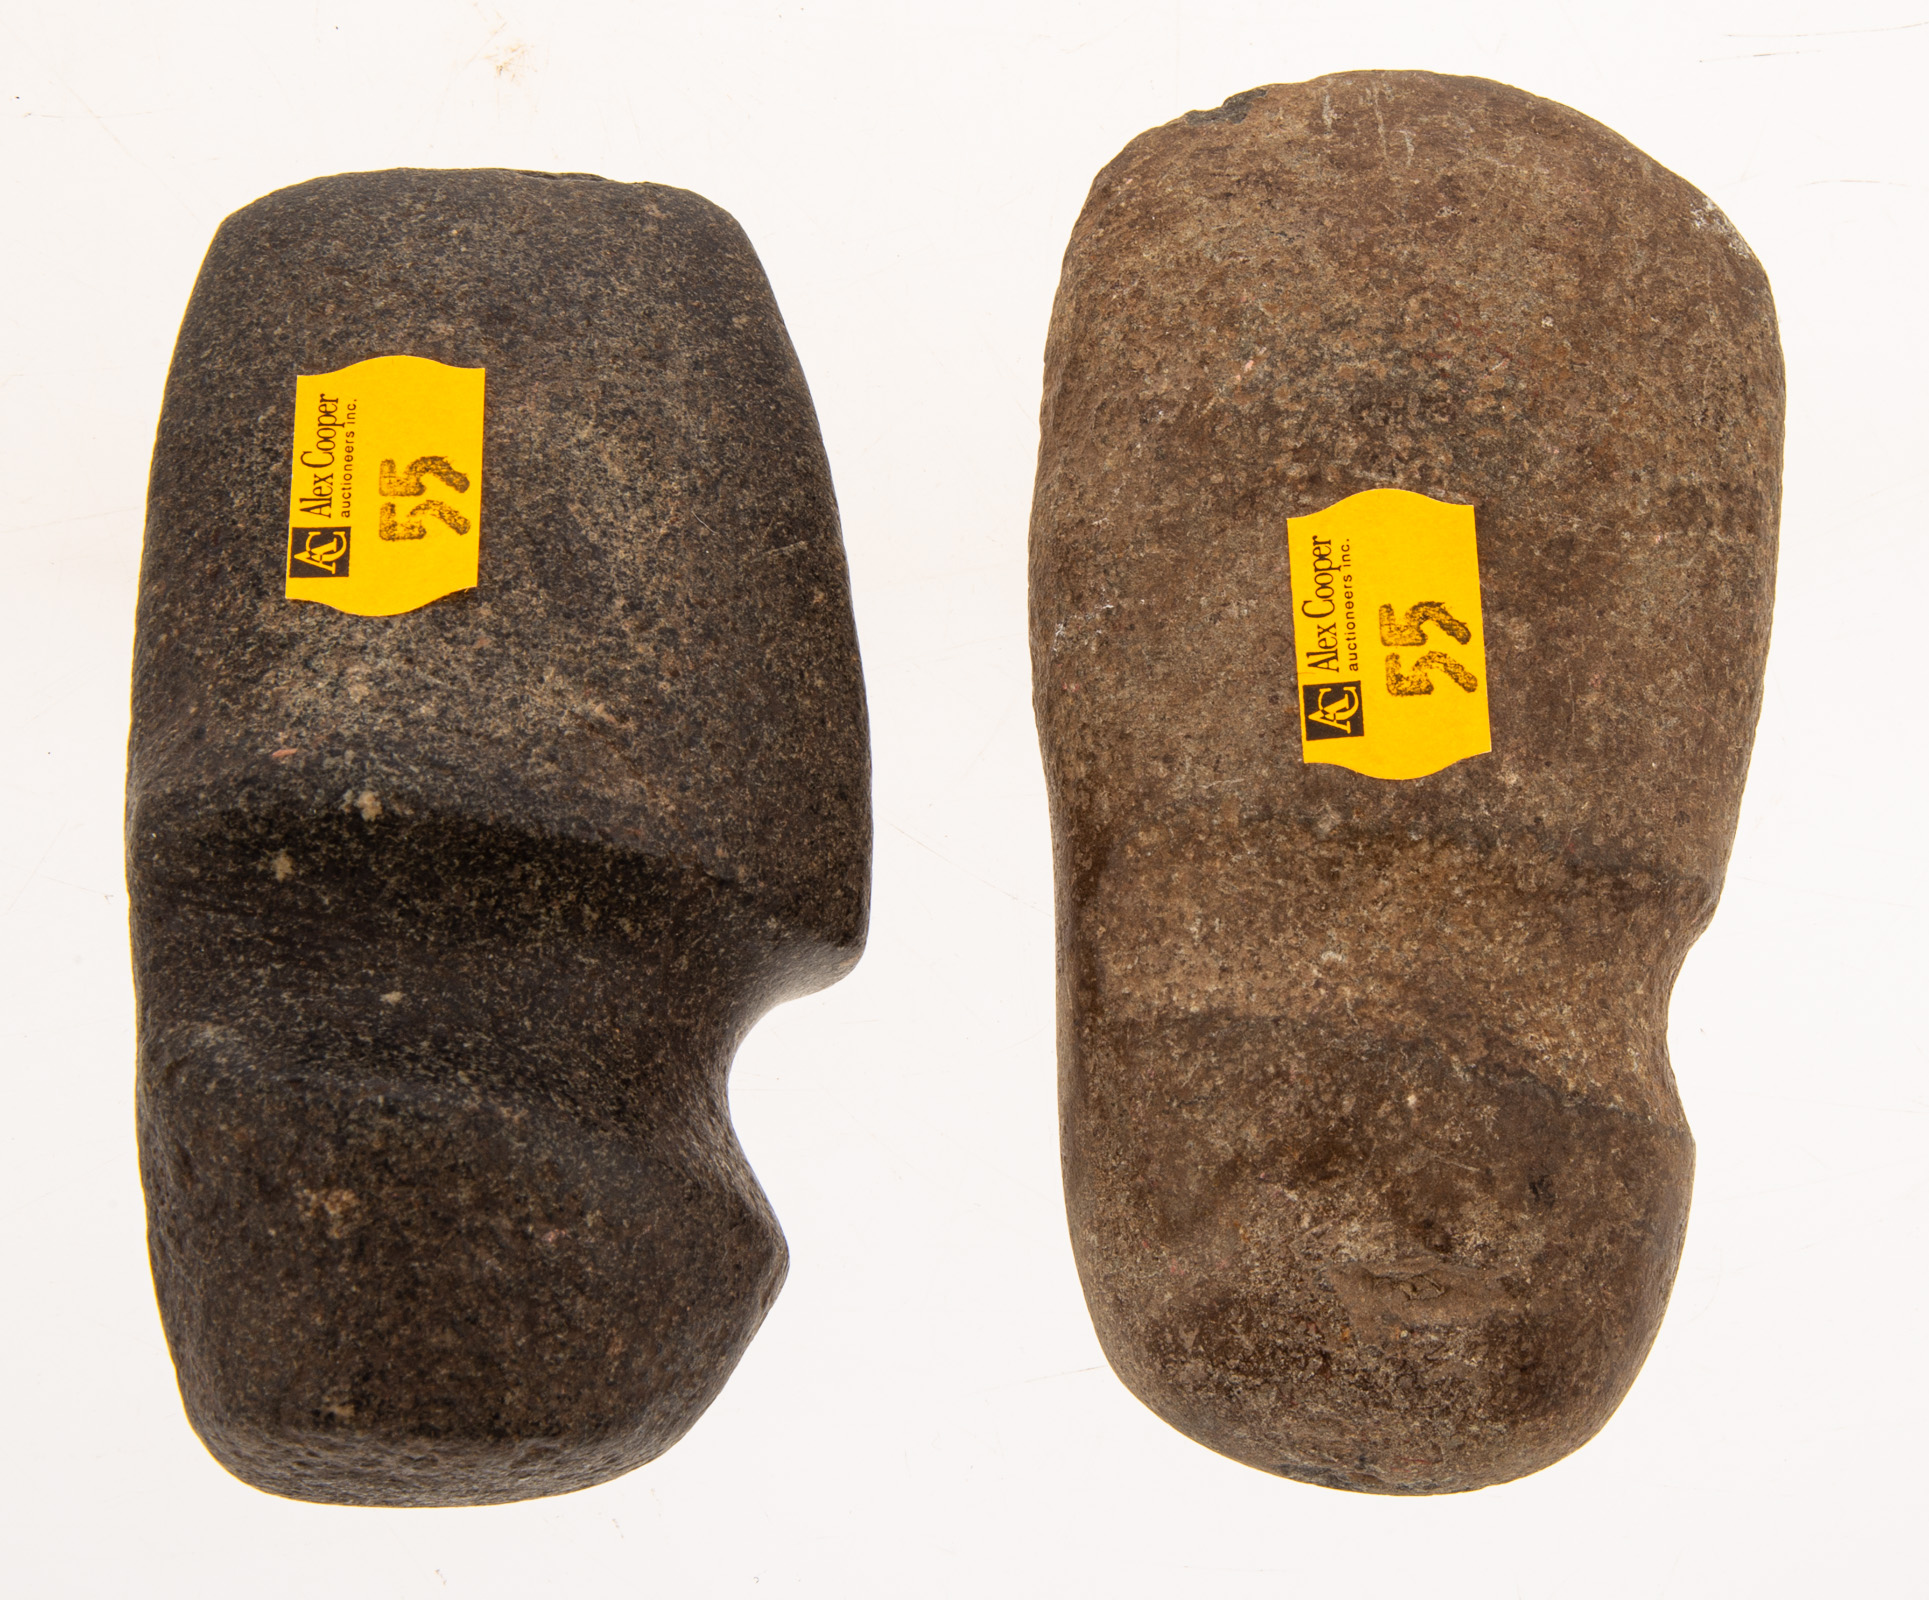 TWO NATIVE AMERICAN STONE AXE HEADS 336a8d